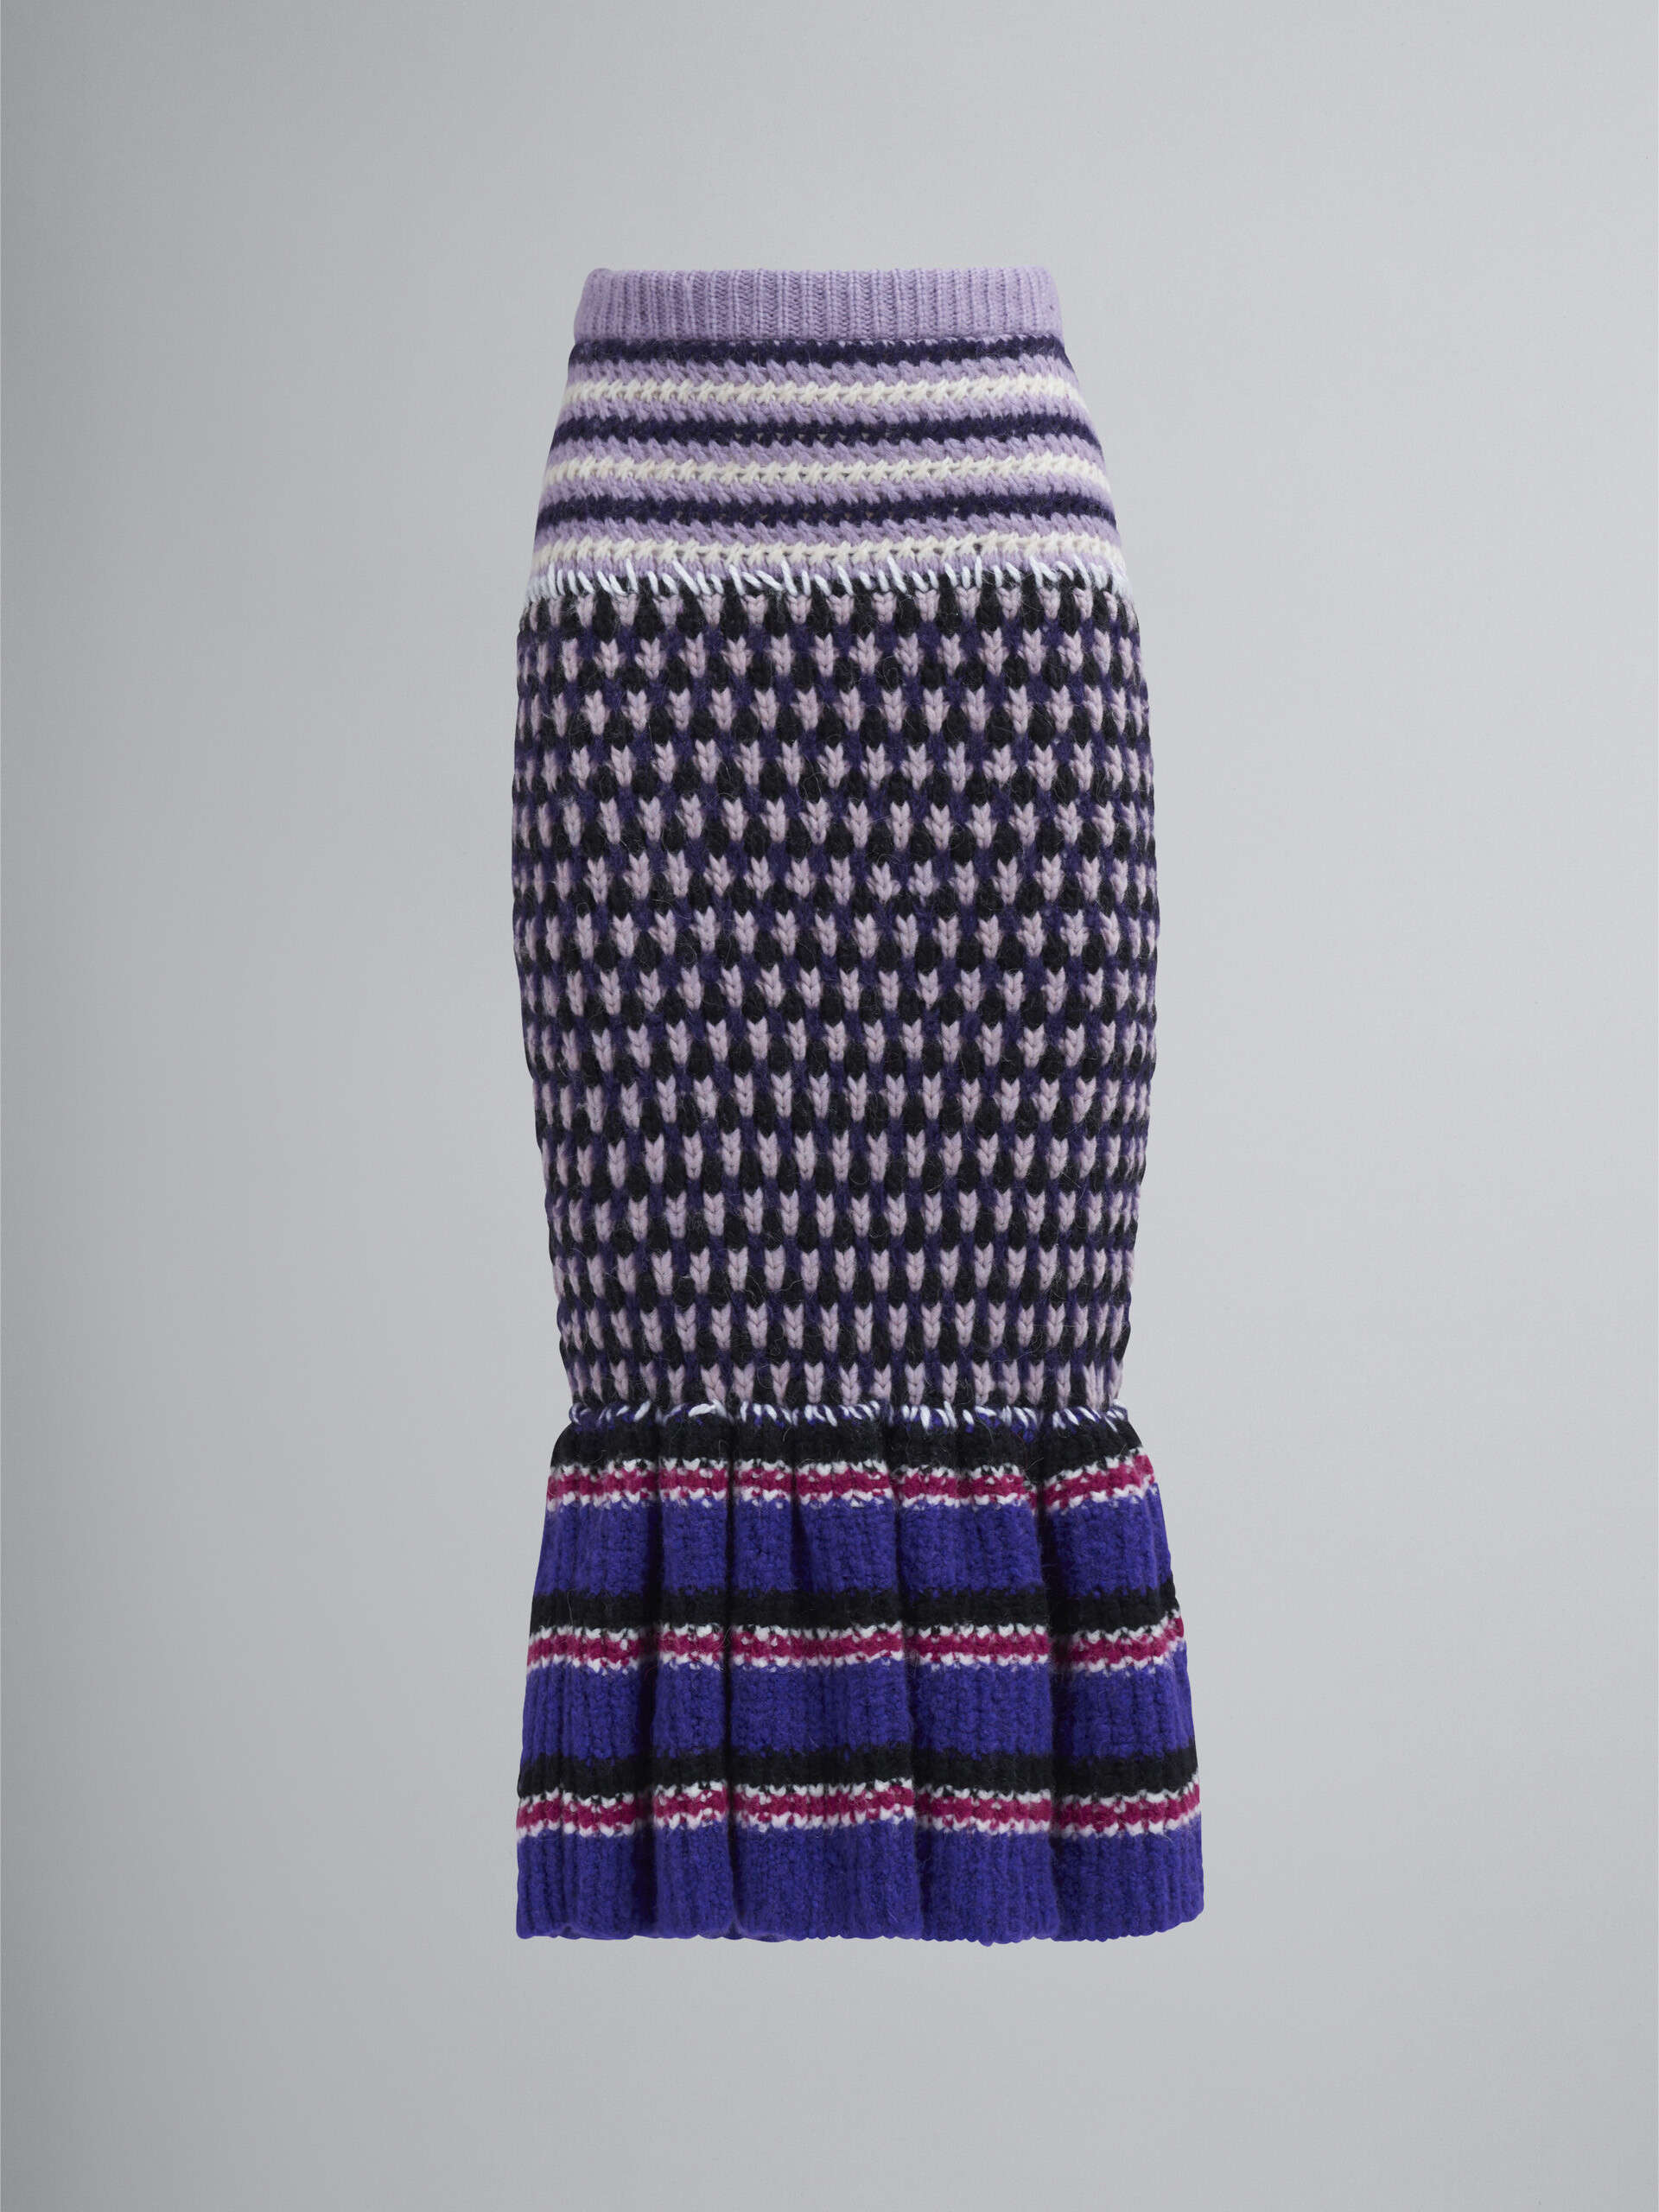 3D-stitch skirt in blended yarns - Skirts - Image 1